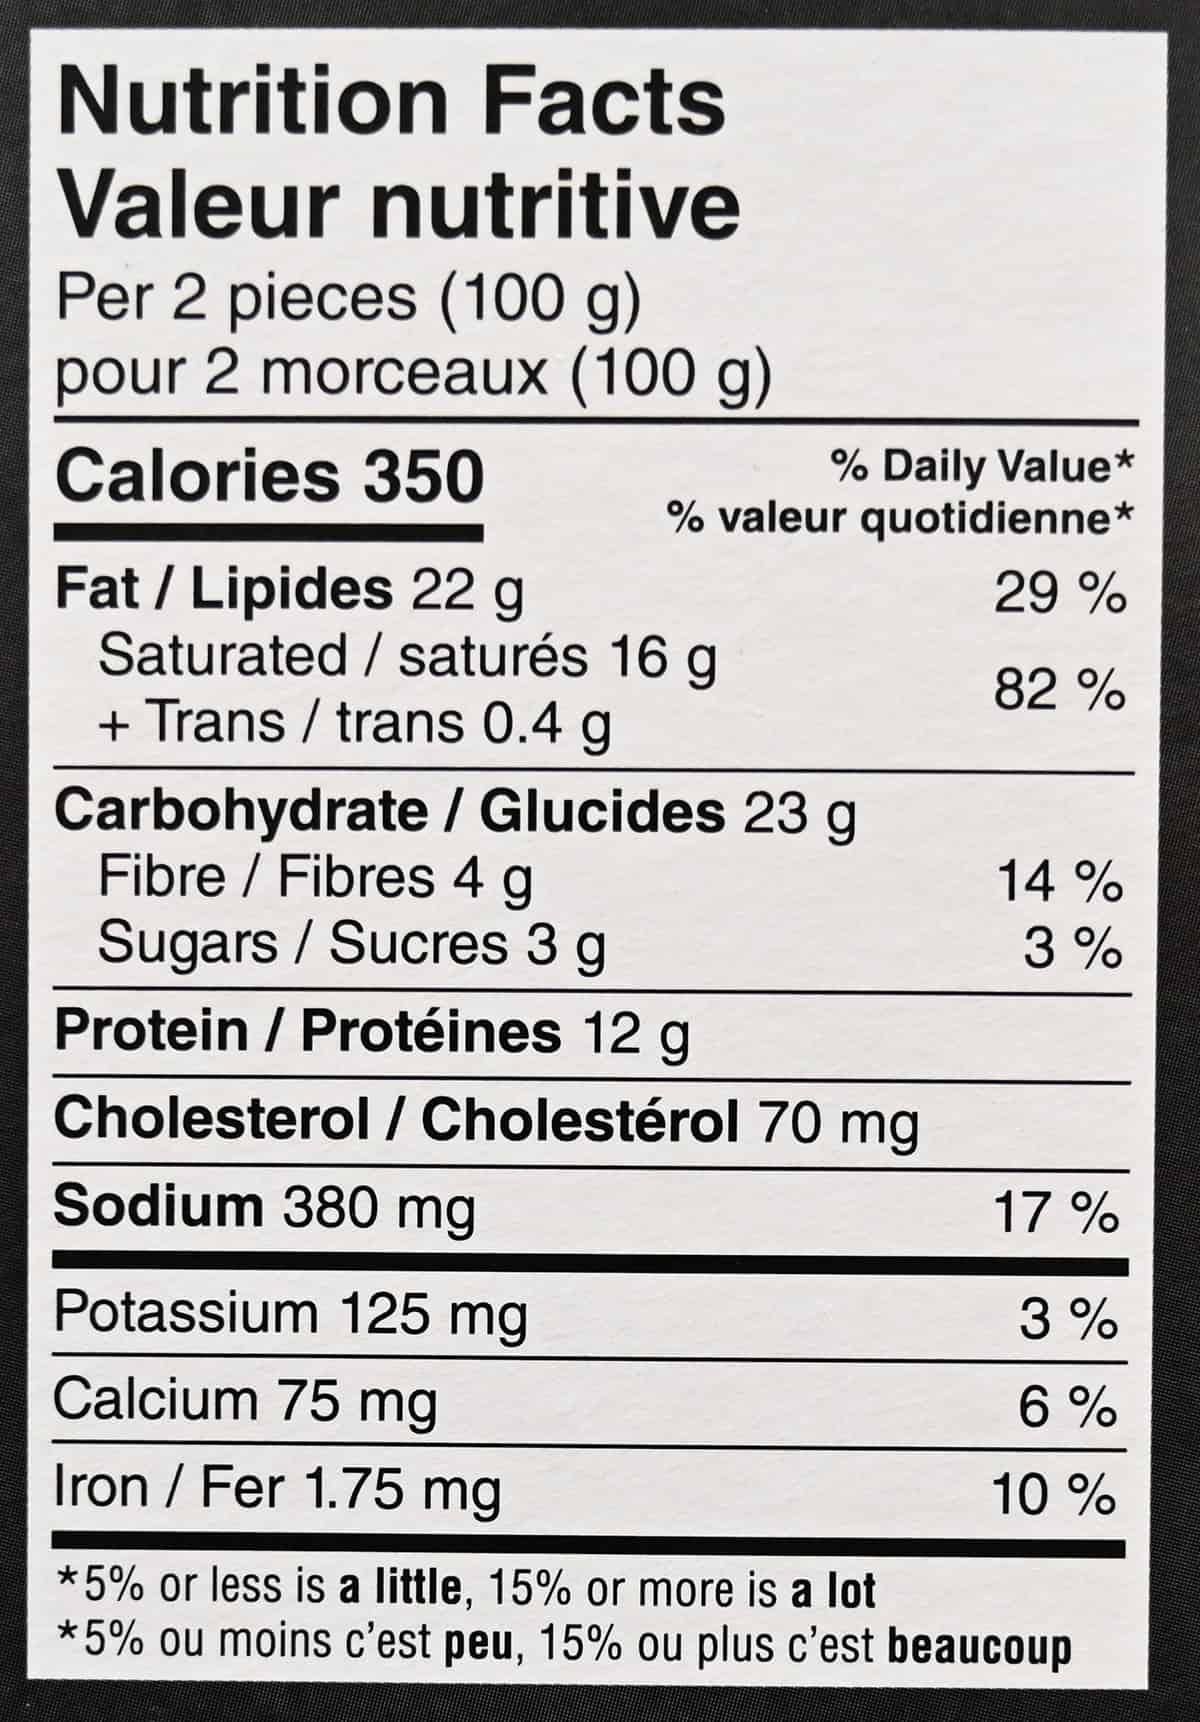 Image of the pastry nutrition facts from the package.